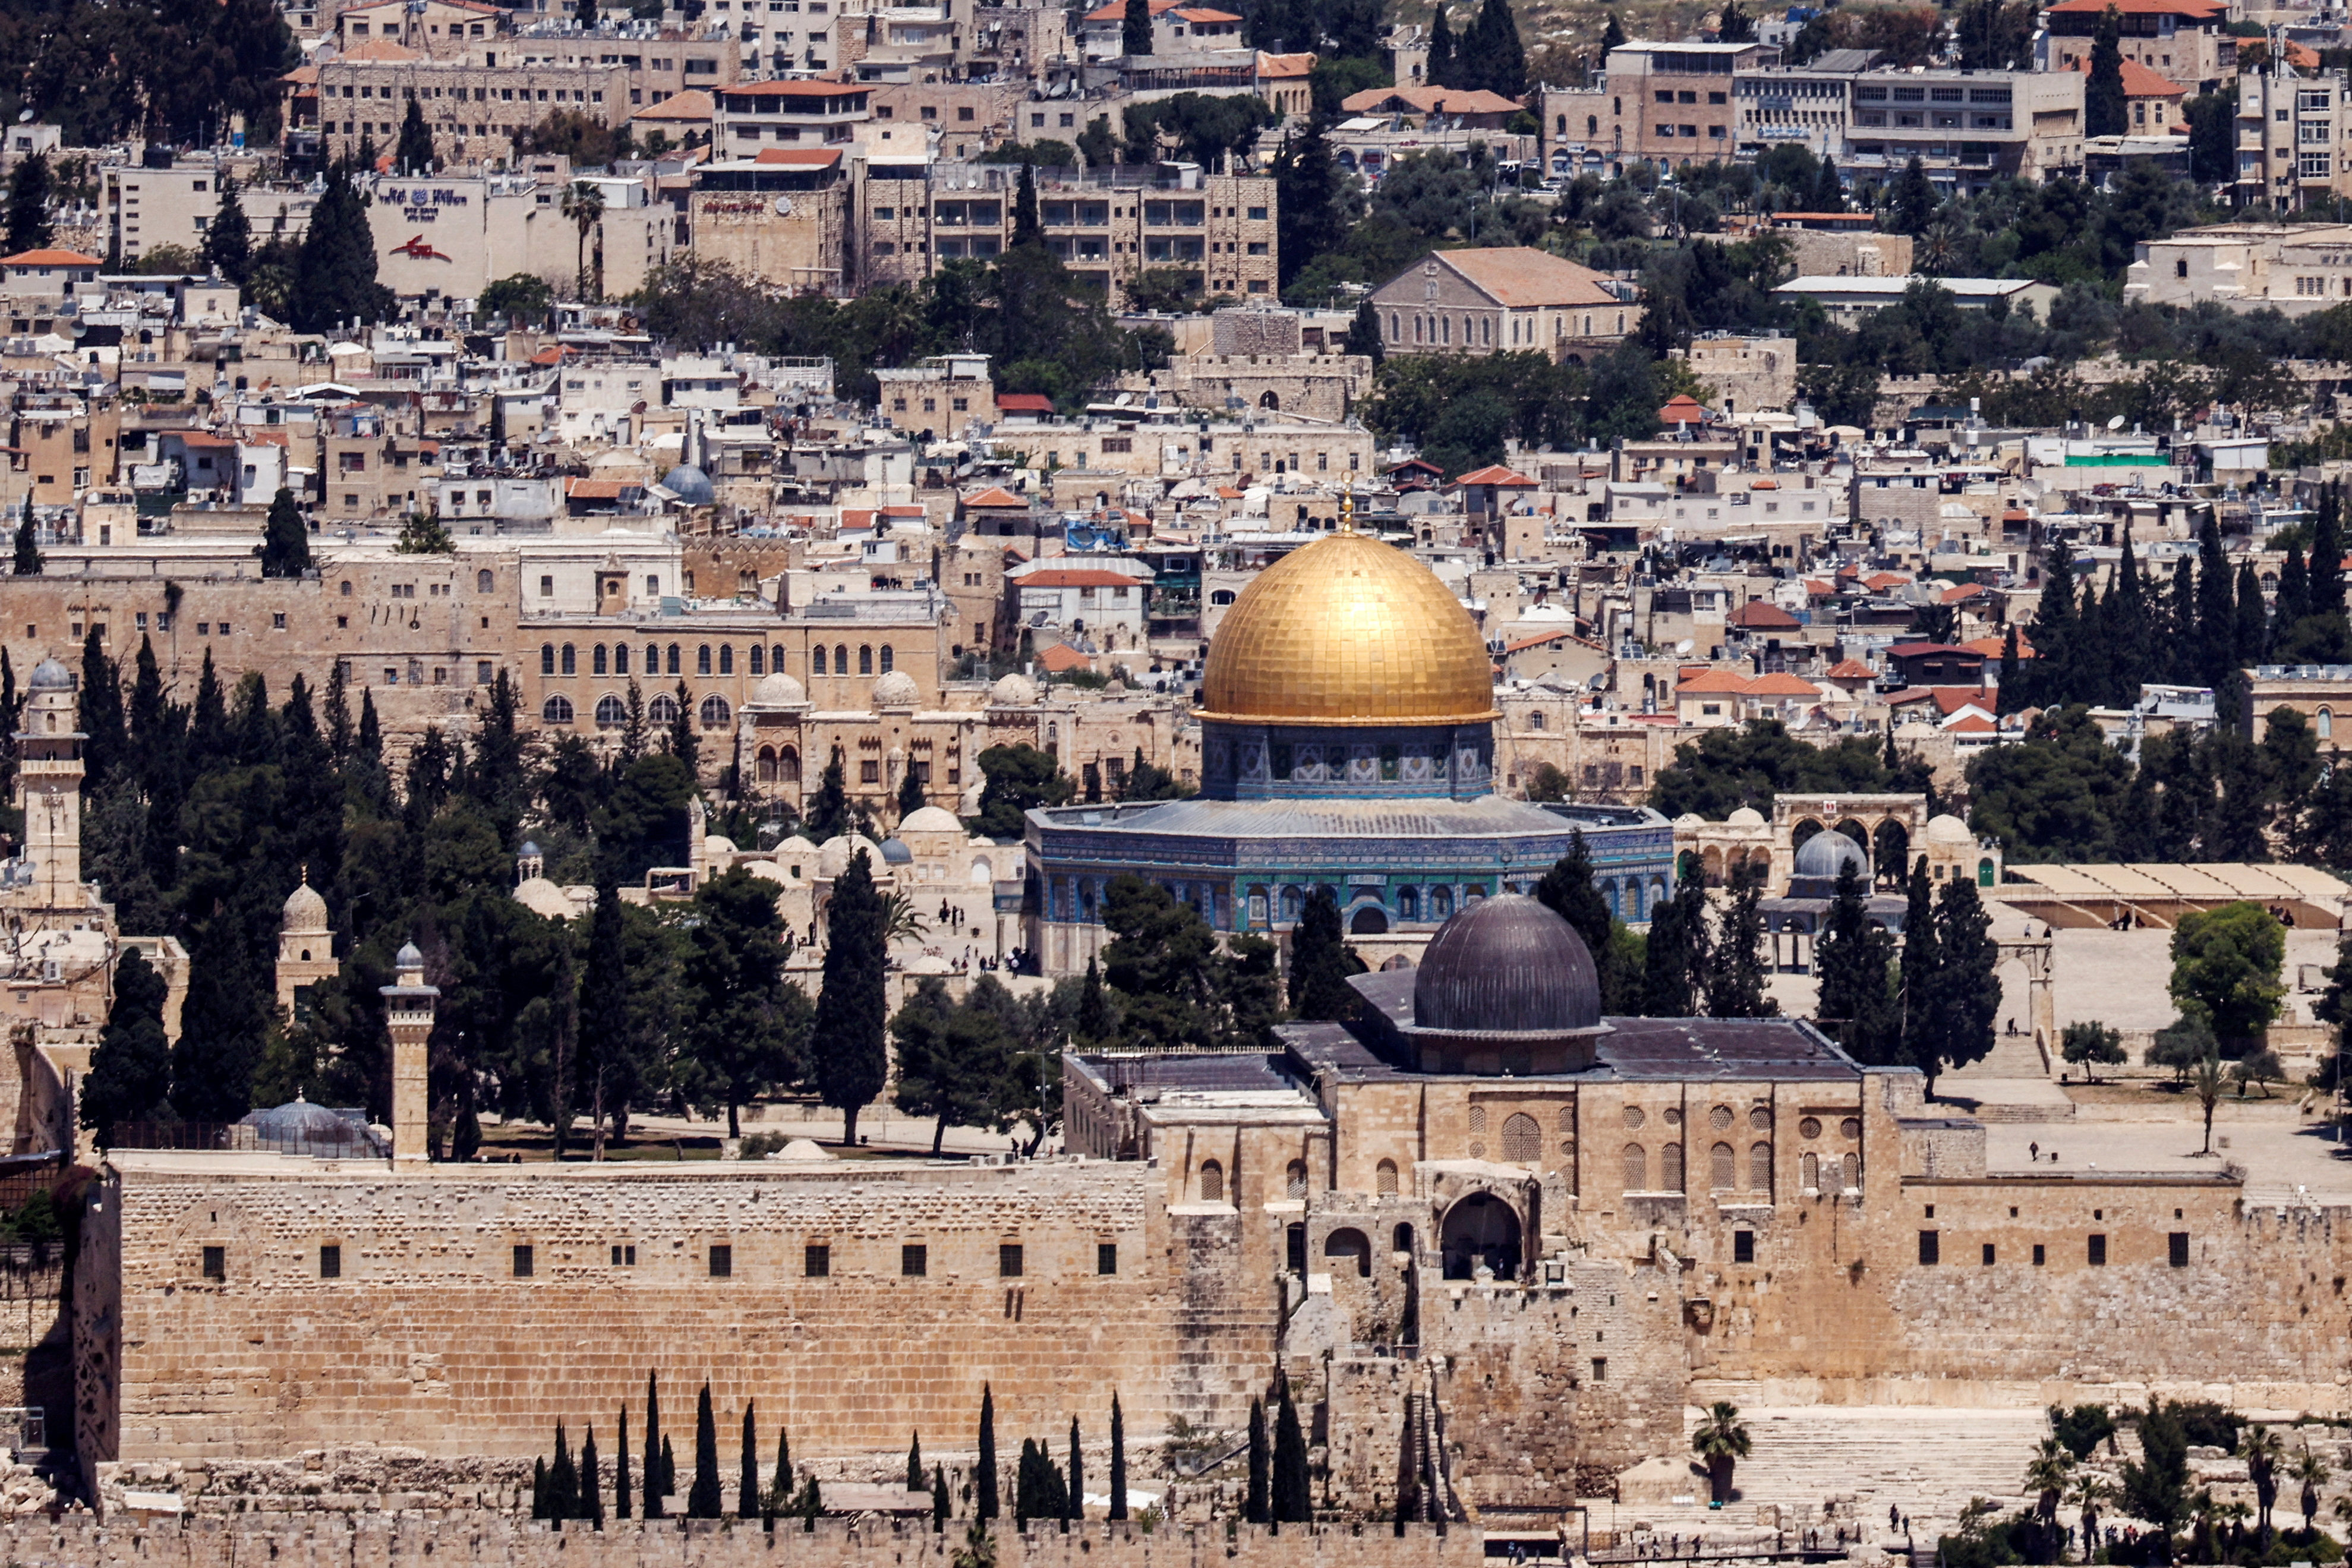 The Dome of the Rock and Al-Aqsa Mosque on the Al-Aqsa compound, also known to Jews as the Temple Mount, in Jerusalem’s Old City on April 26, 2023. Photo: Reuters